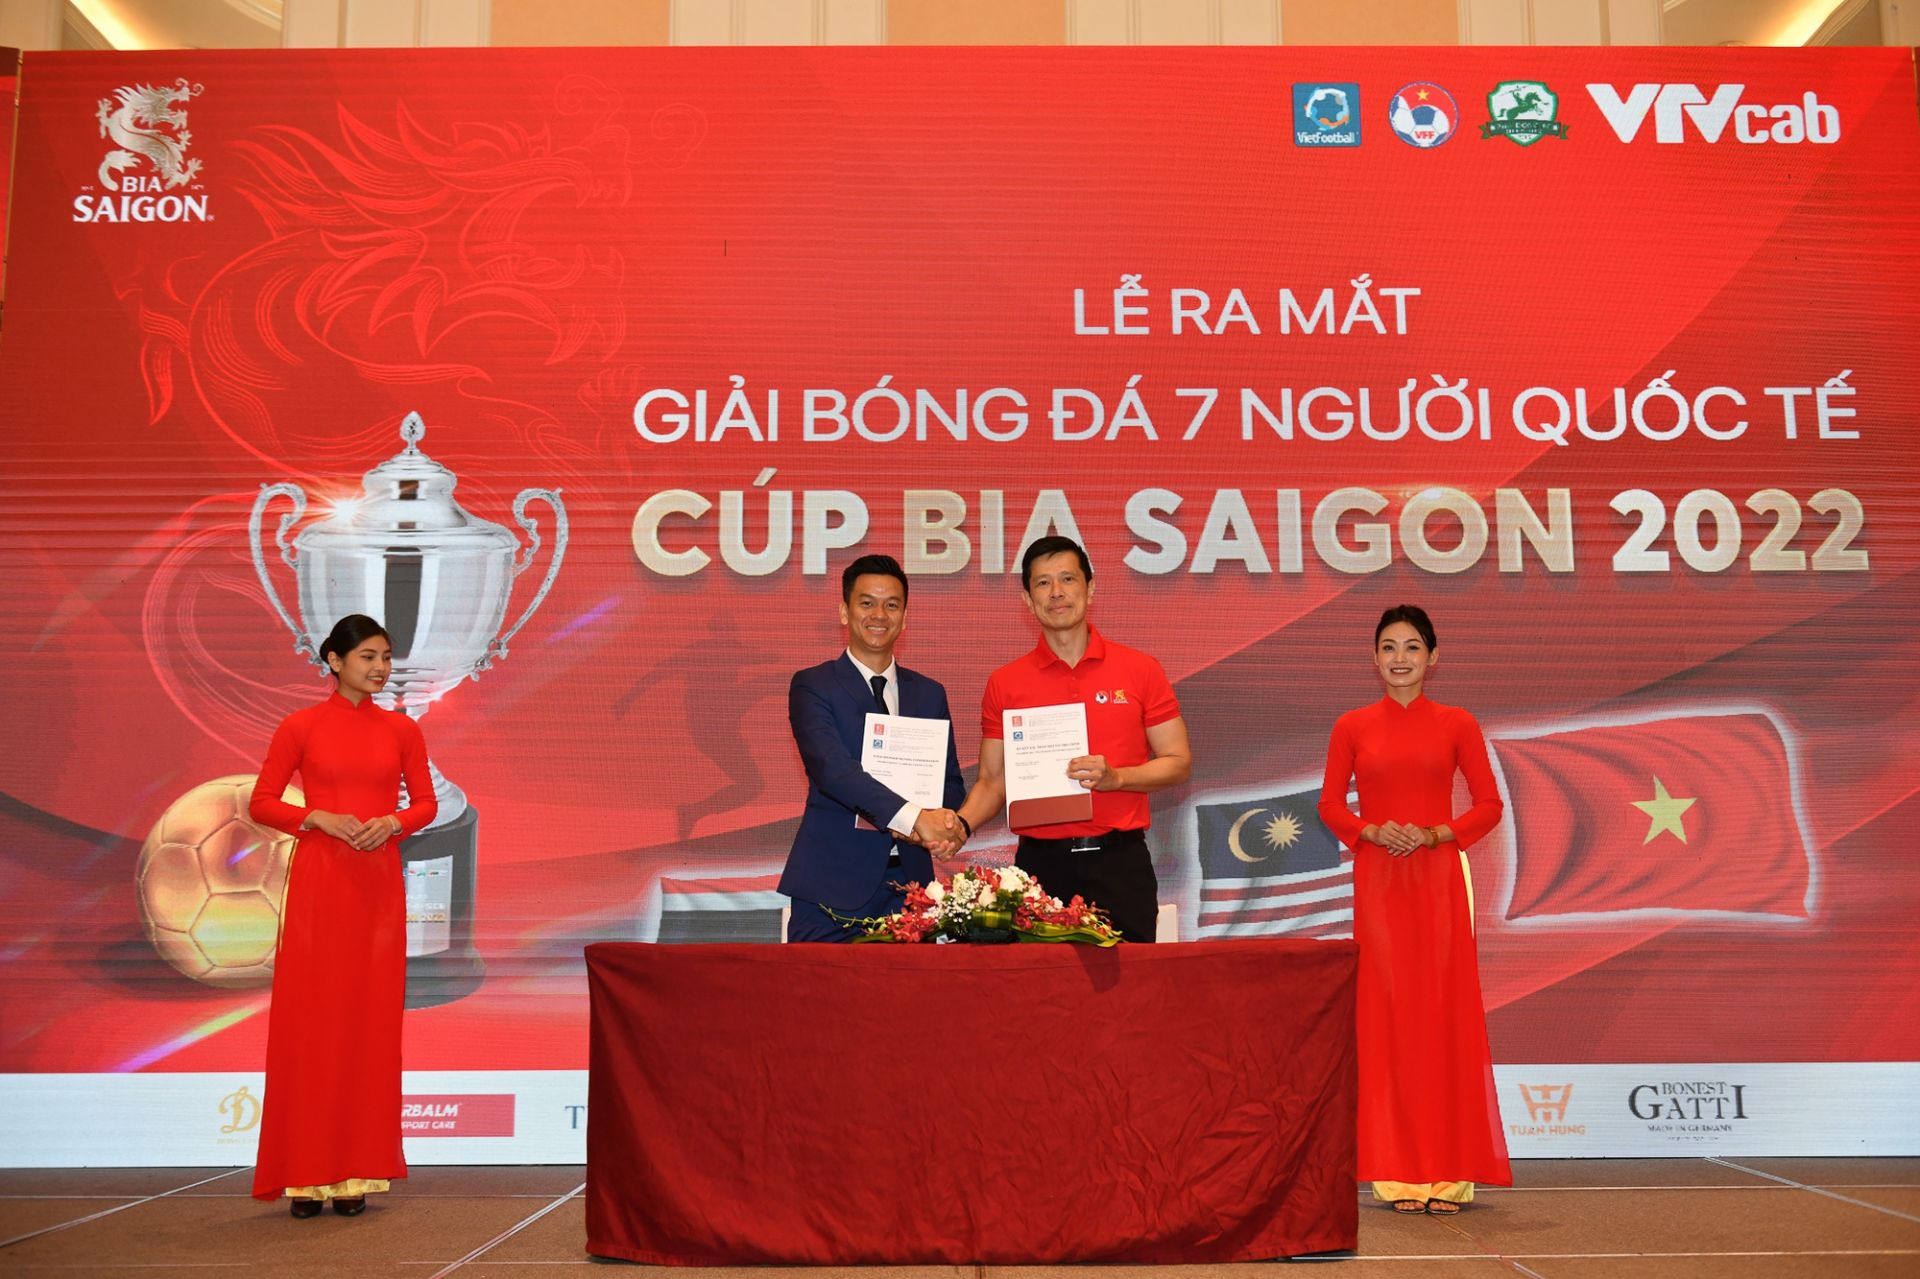 FIRST EVER INTERNATIONAL 7-A-SIDE BIA SAIGON CUP CHAMPIONSHIP 2022 KICK STARTS ON 23 TO 25 DEC 2022 IN HANOI